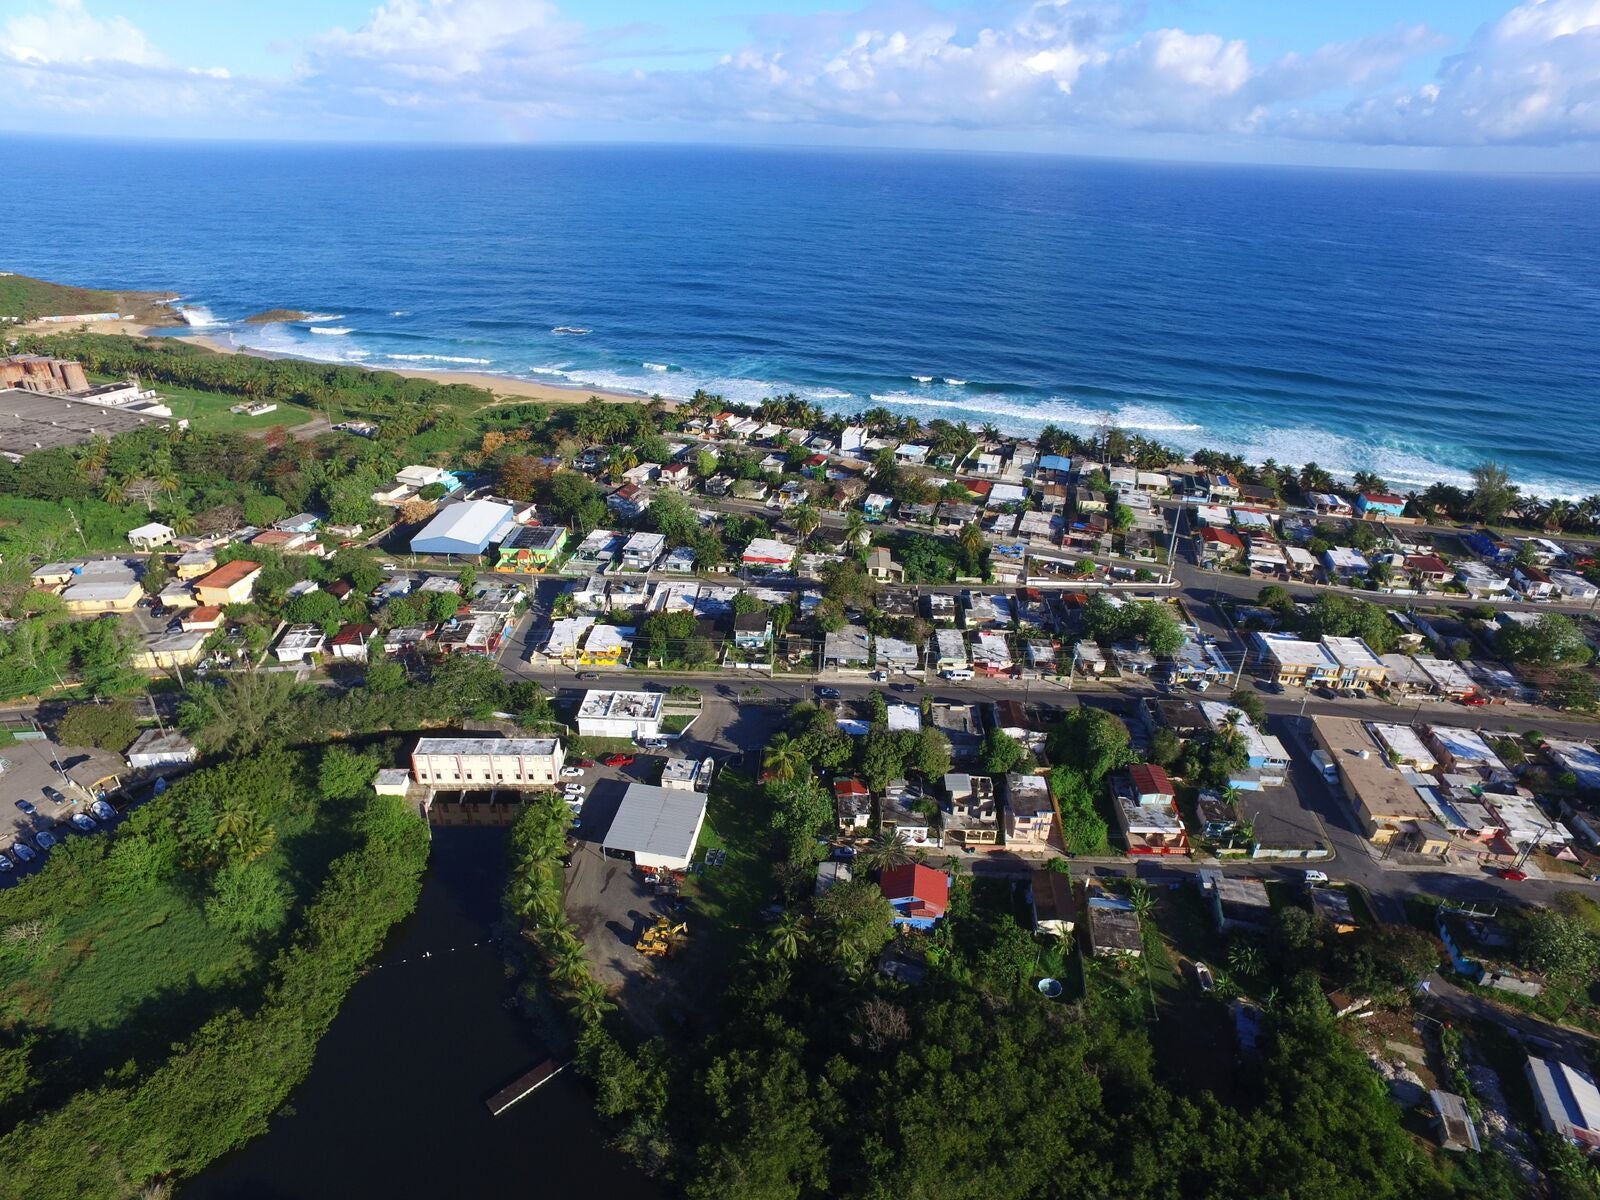 An aerial view of homes and the blue ocean in Arecibo, Puerto Rico.